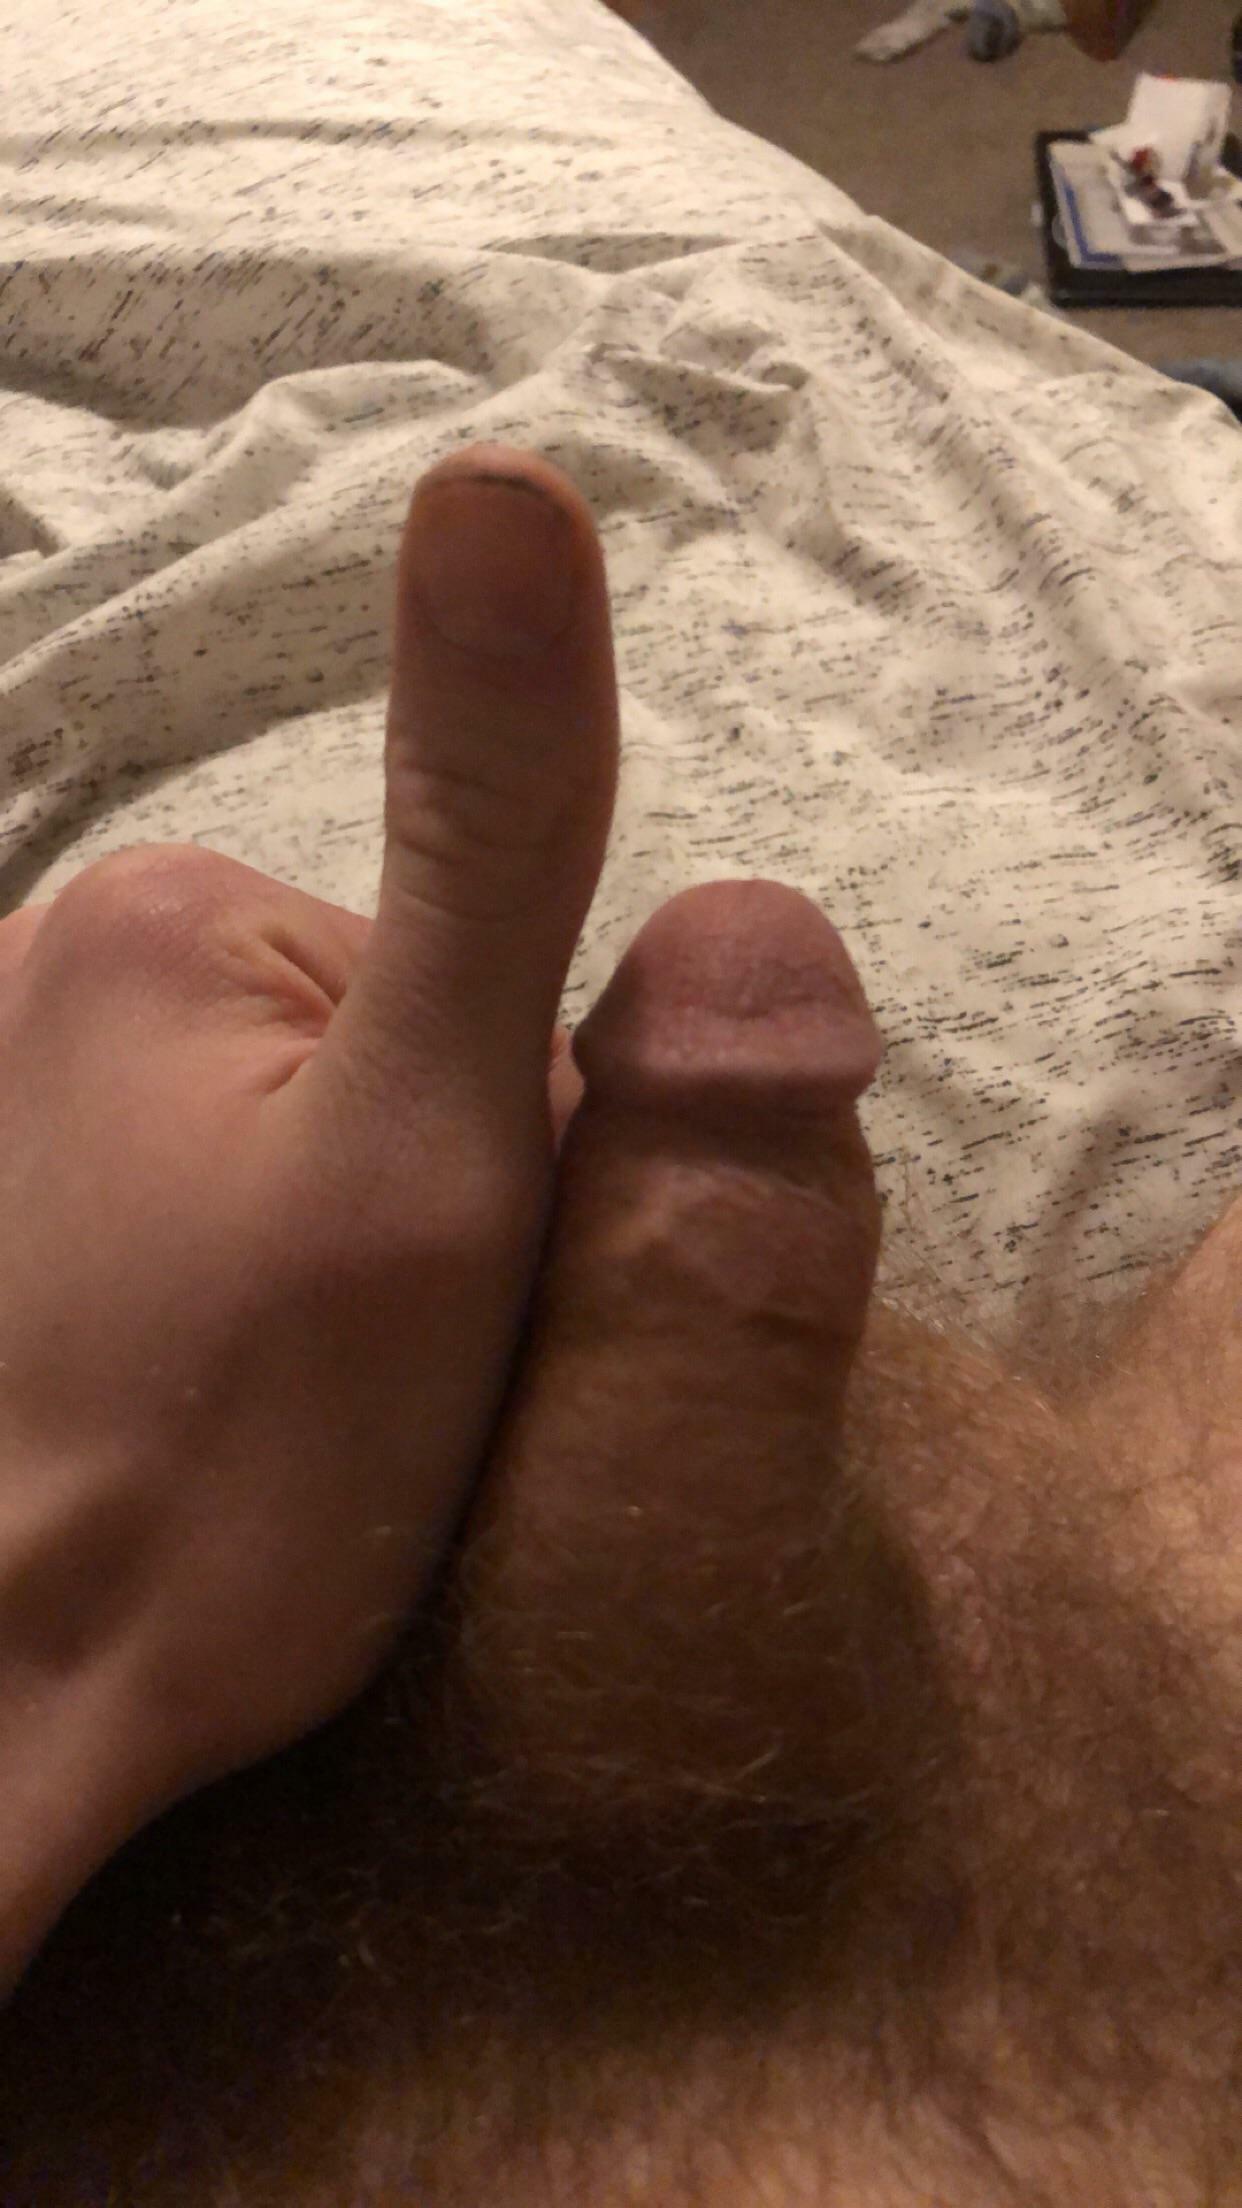 Got cucked by my girlfriend for the first time today, every up vote is a blowjob pic